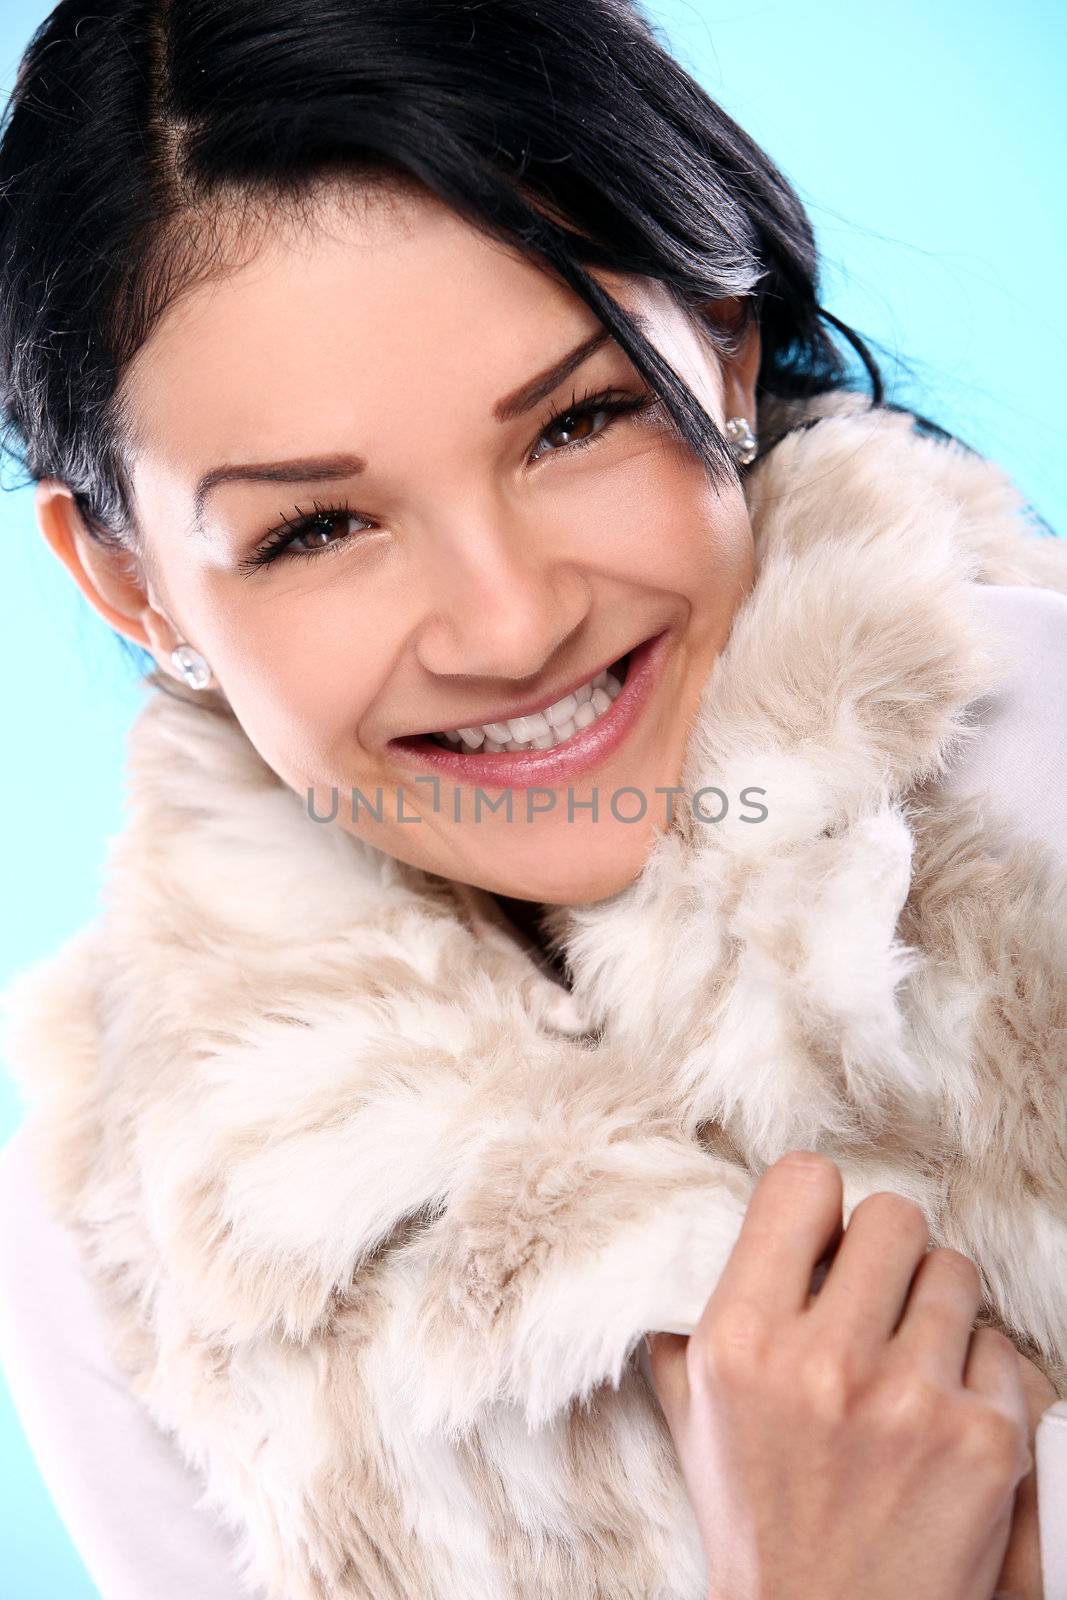 Beautifull smiling young girl in fur isolated on a blue